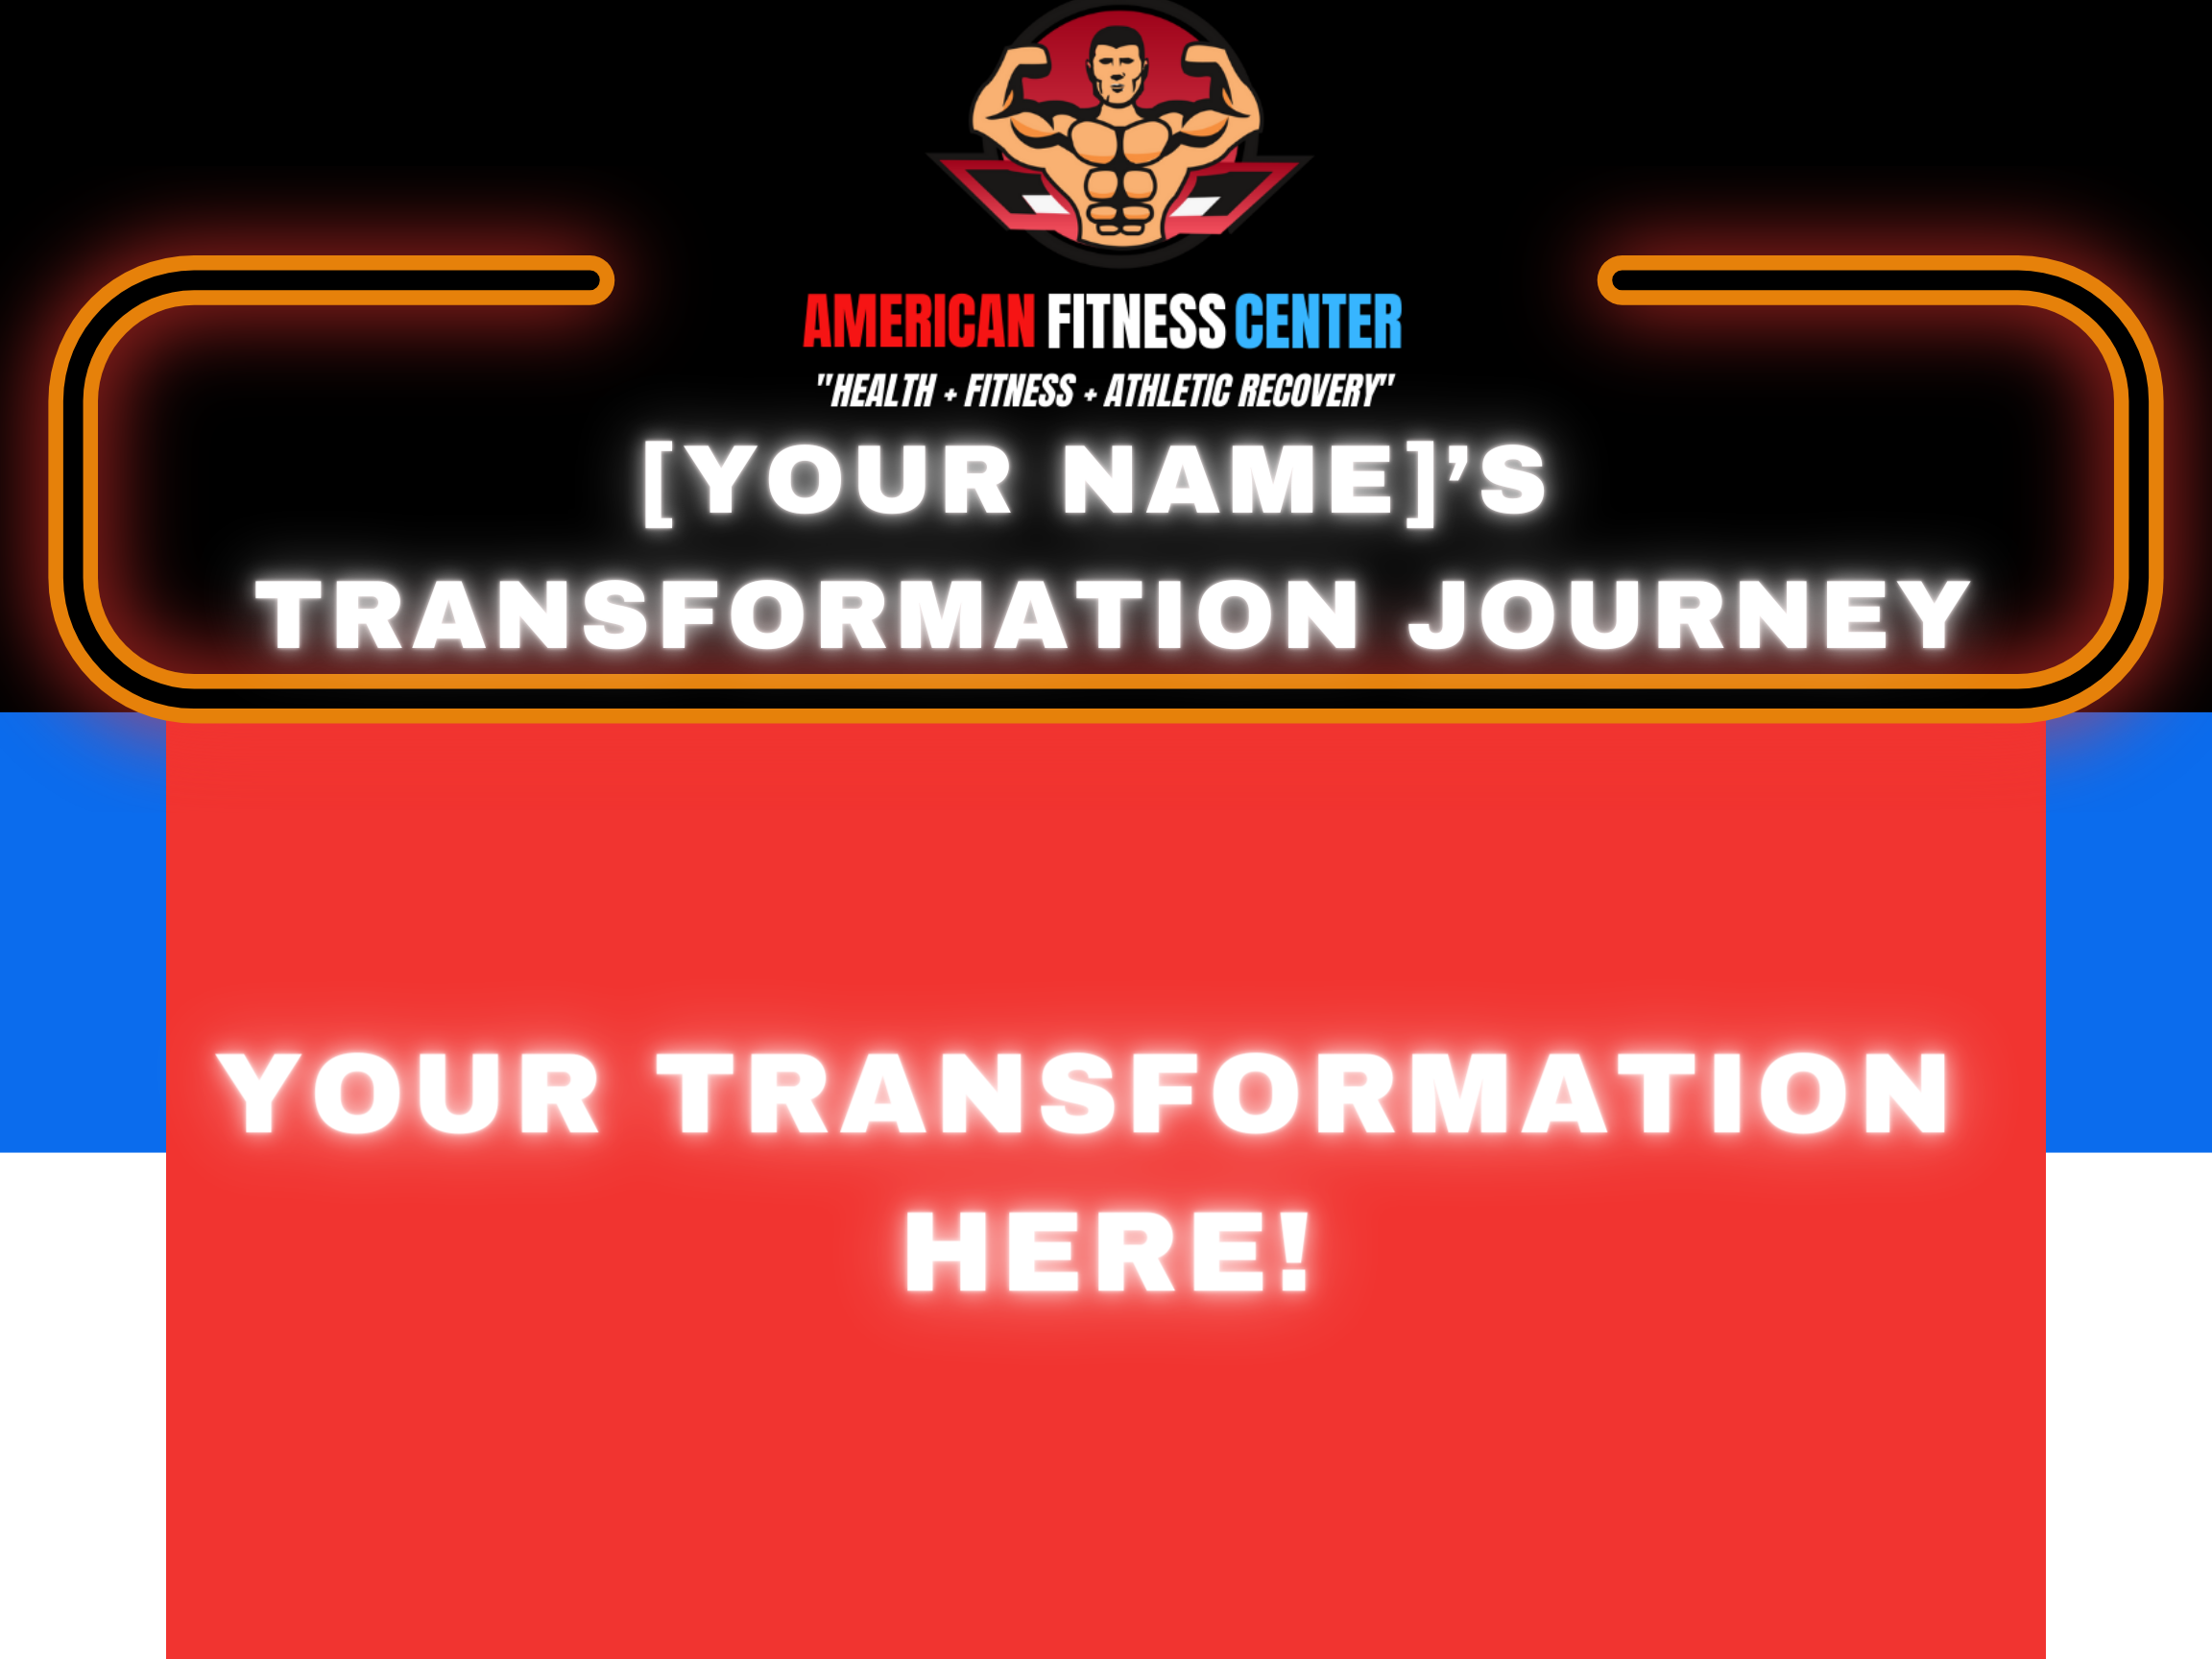 Add Your Personal Fitness Training Transformation Here - American Fitness Center